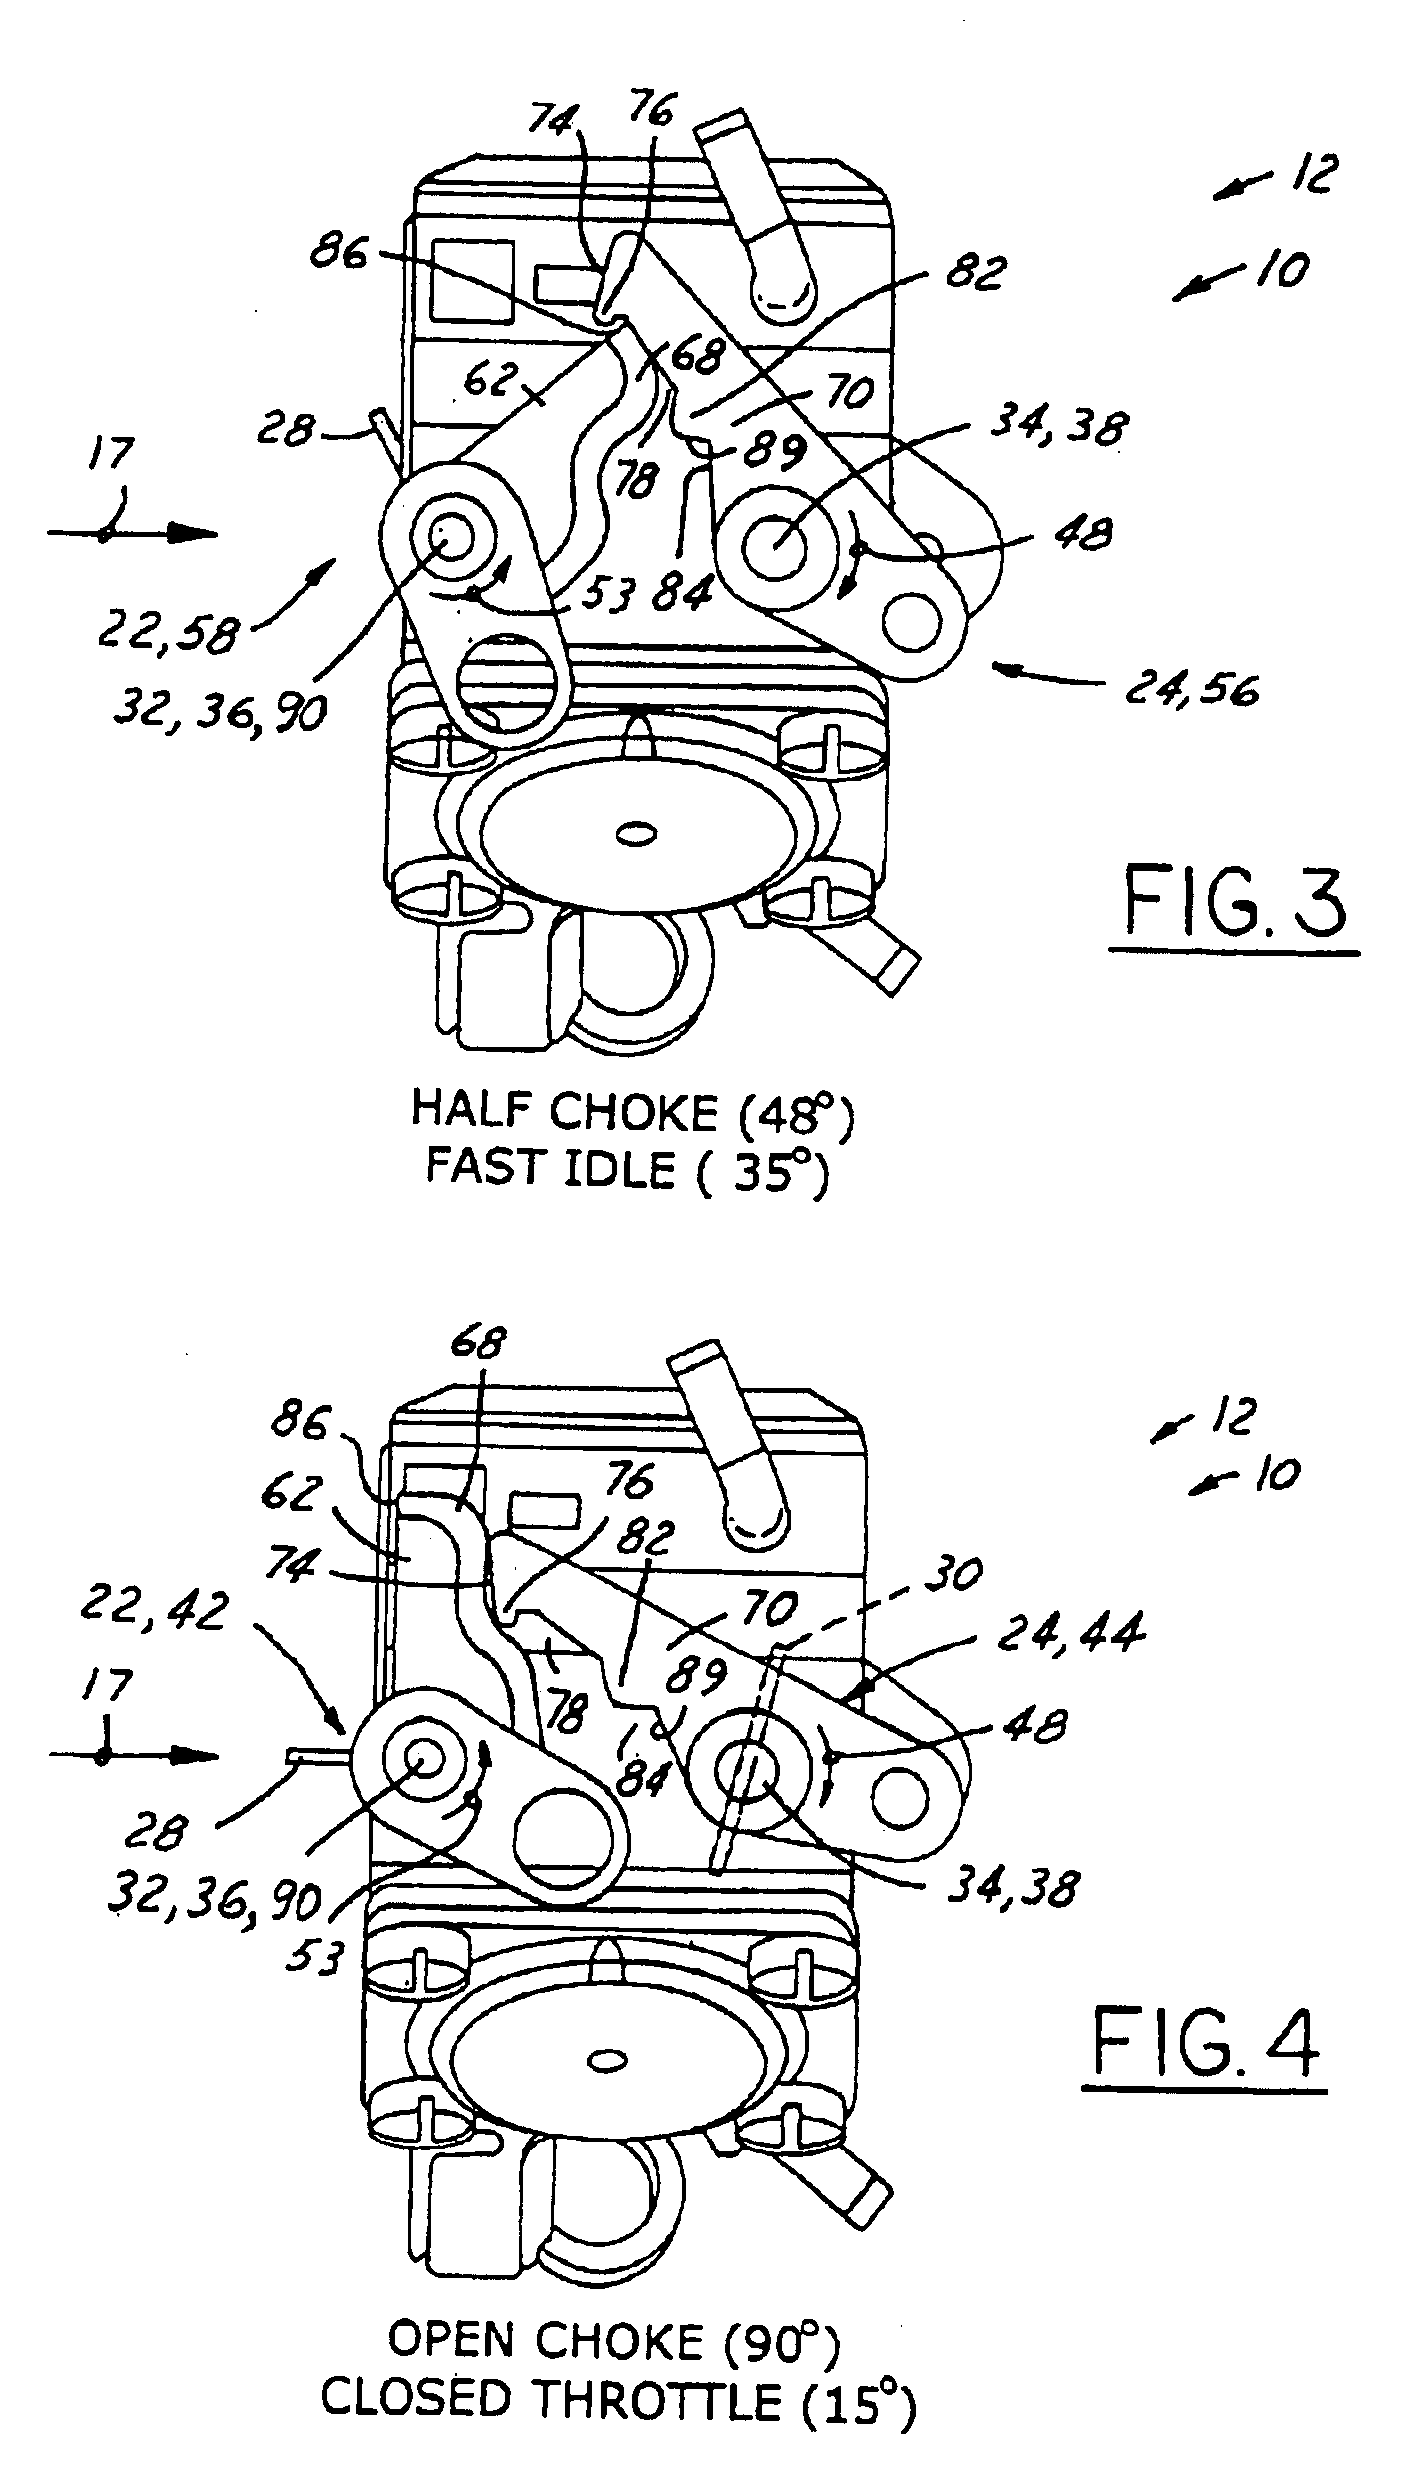 Self-relieving choke starting system for a combustion engine carburetor